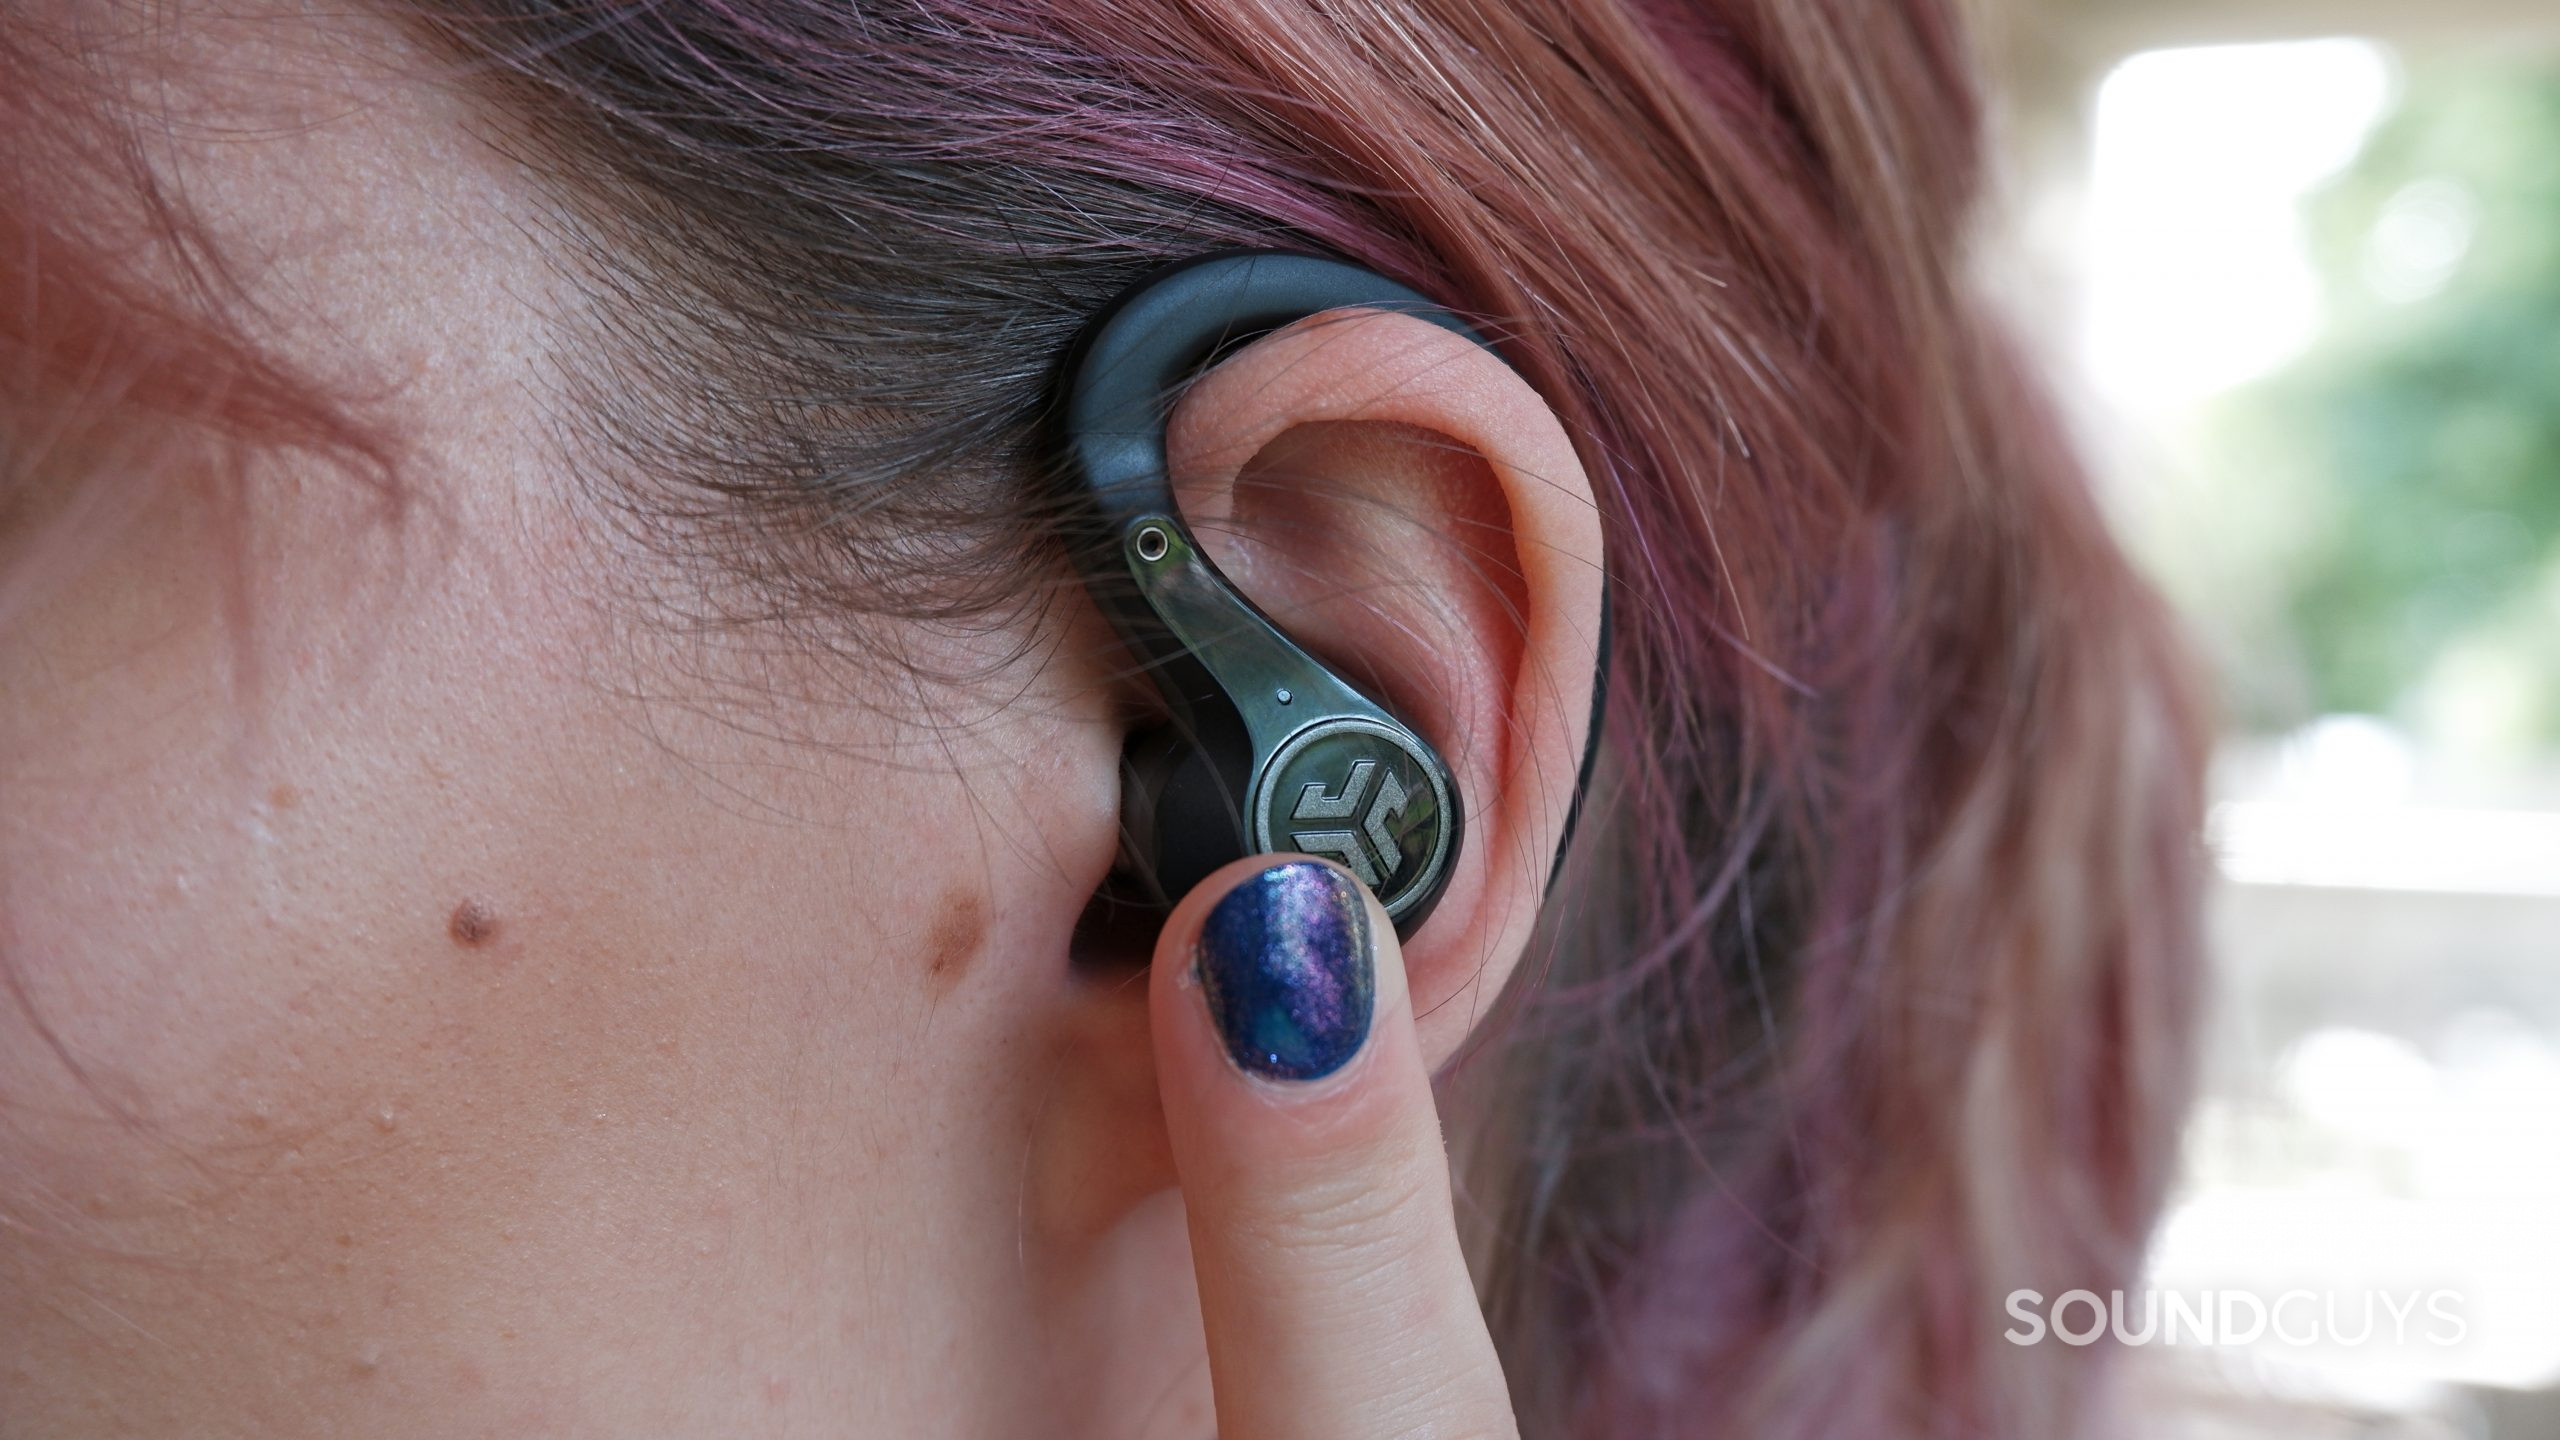 The JLab Epic Air Sport ANC being worn in an ear, with a finger pressing the touch sensor.